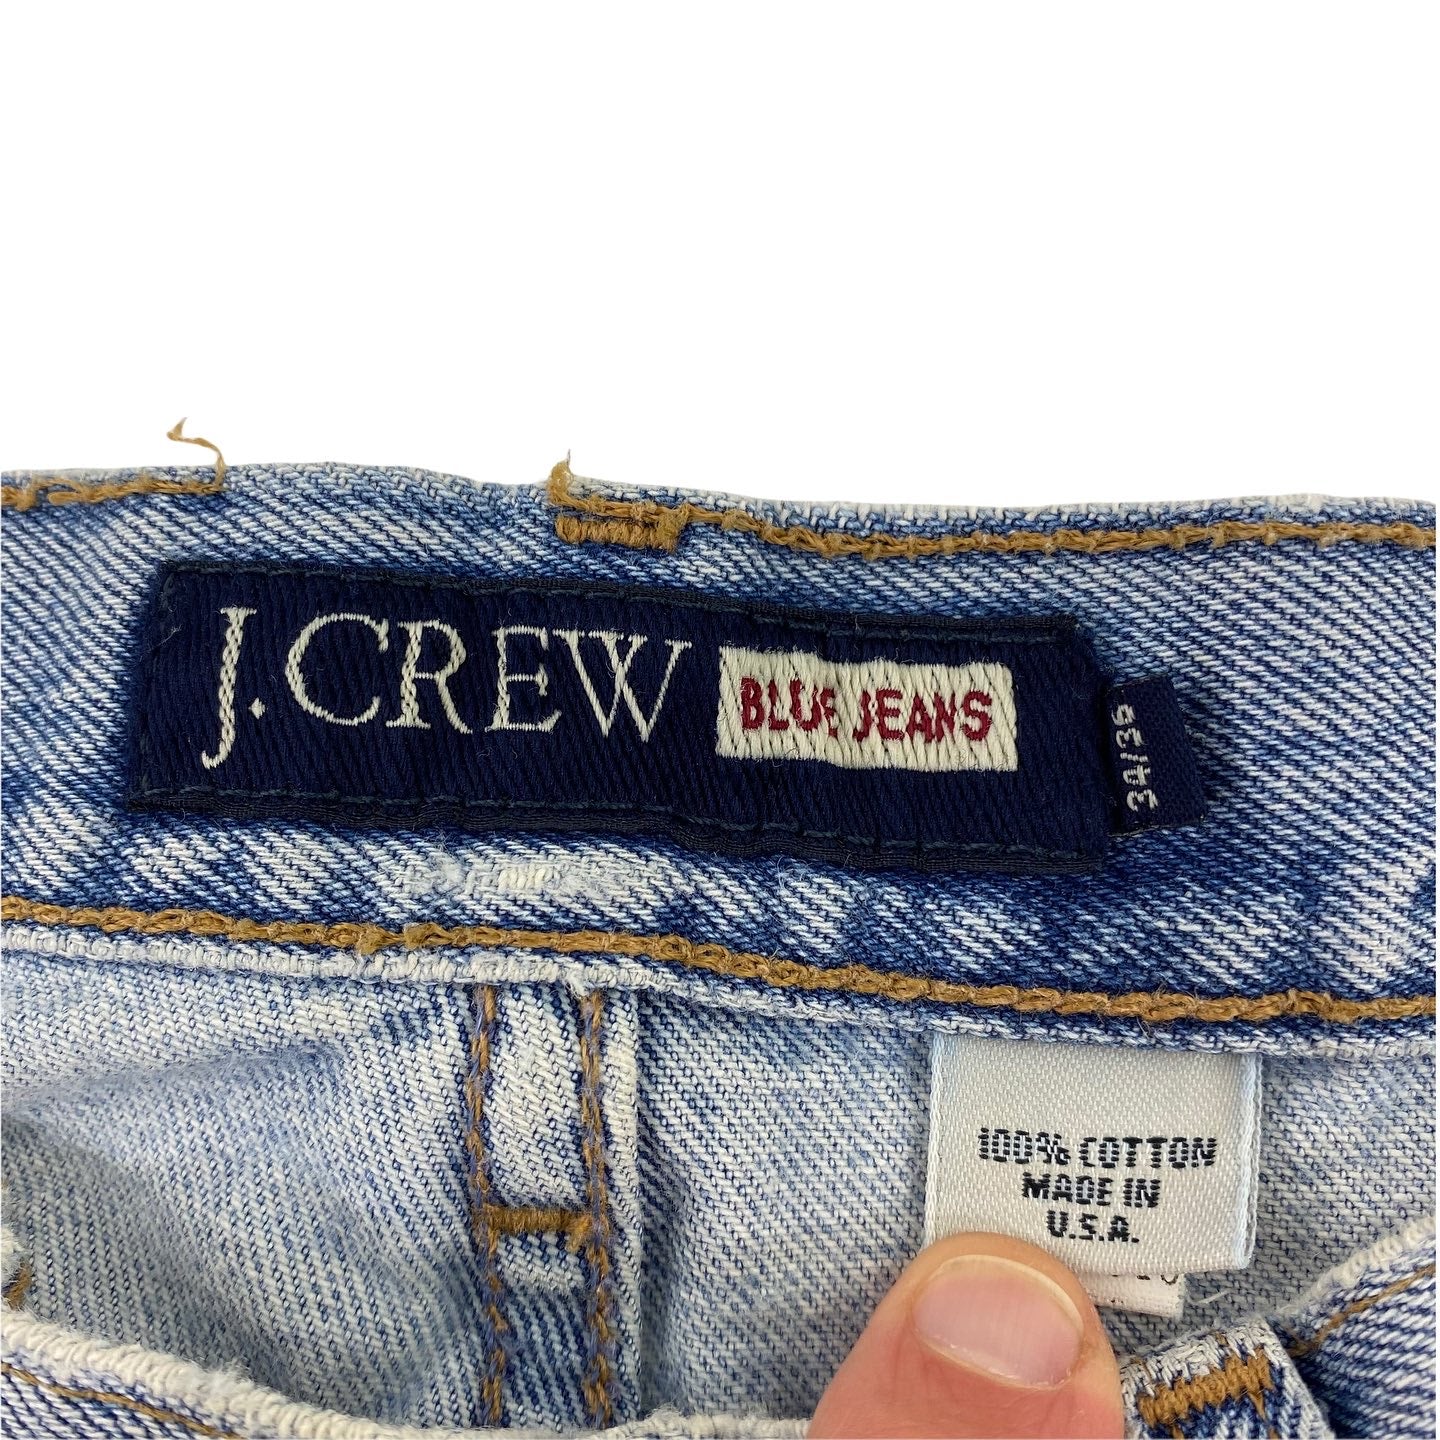 90s J crew jeans Made in usa🇺🇸 34/36